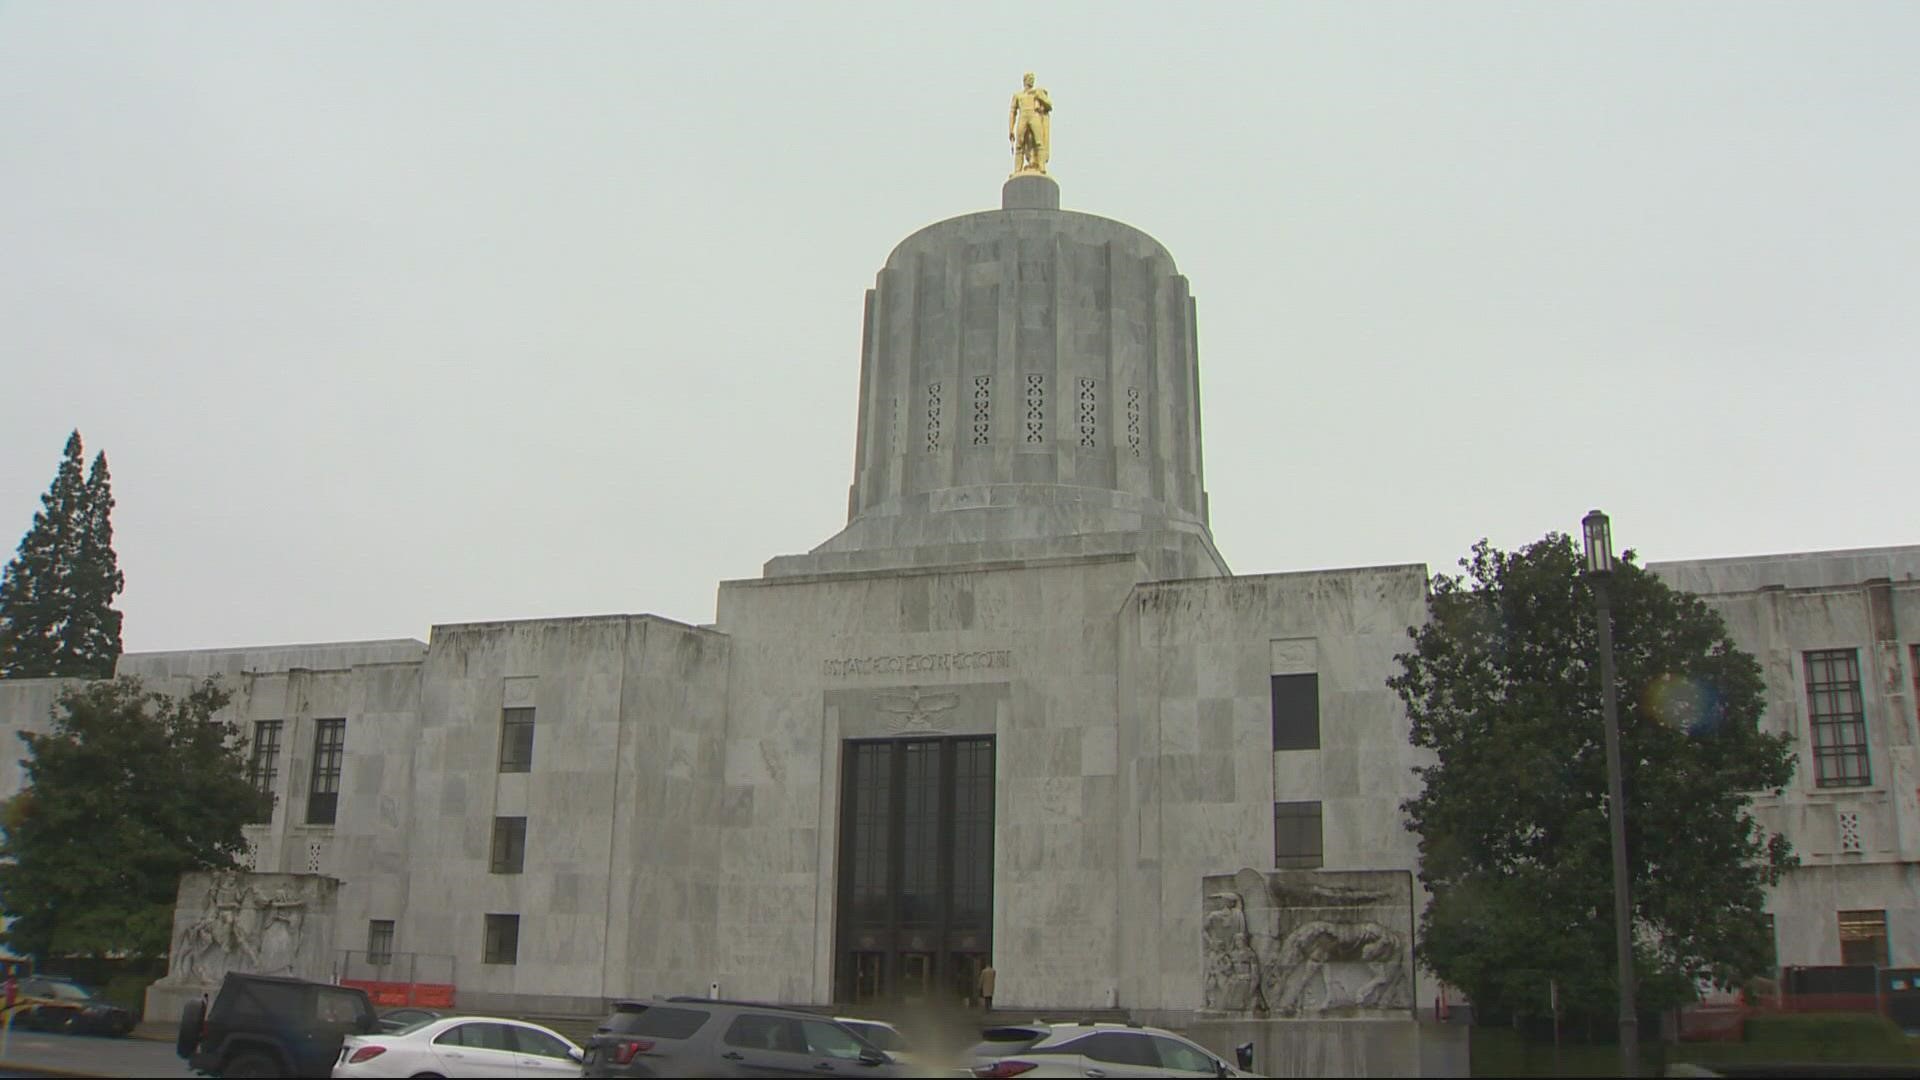 Oregon's legislature will gather for a special session to take up redistricting, starting Monday. The process only happens every 10 years.